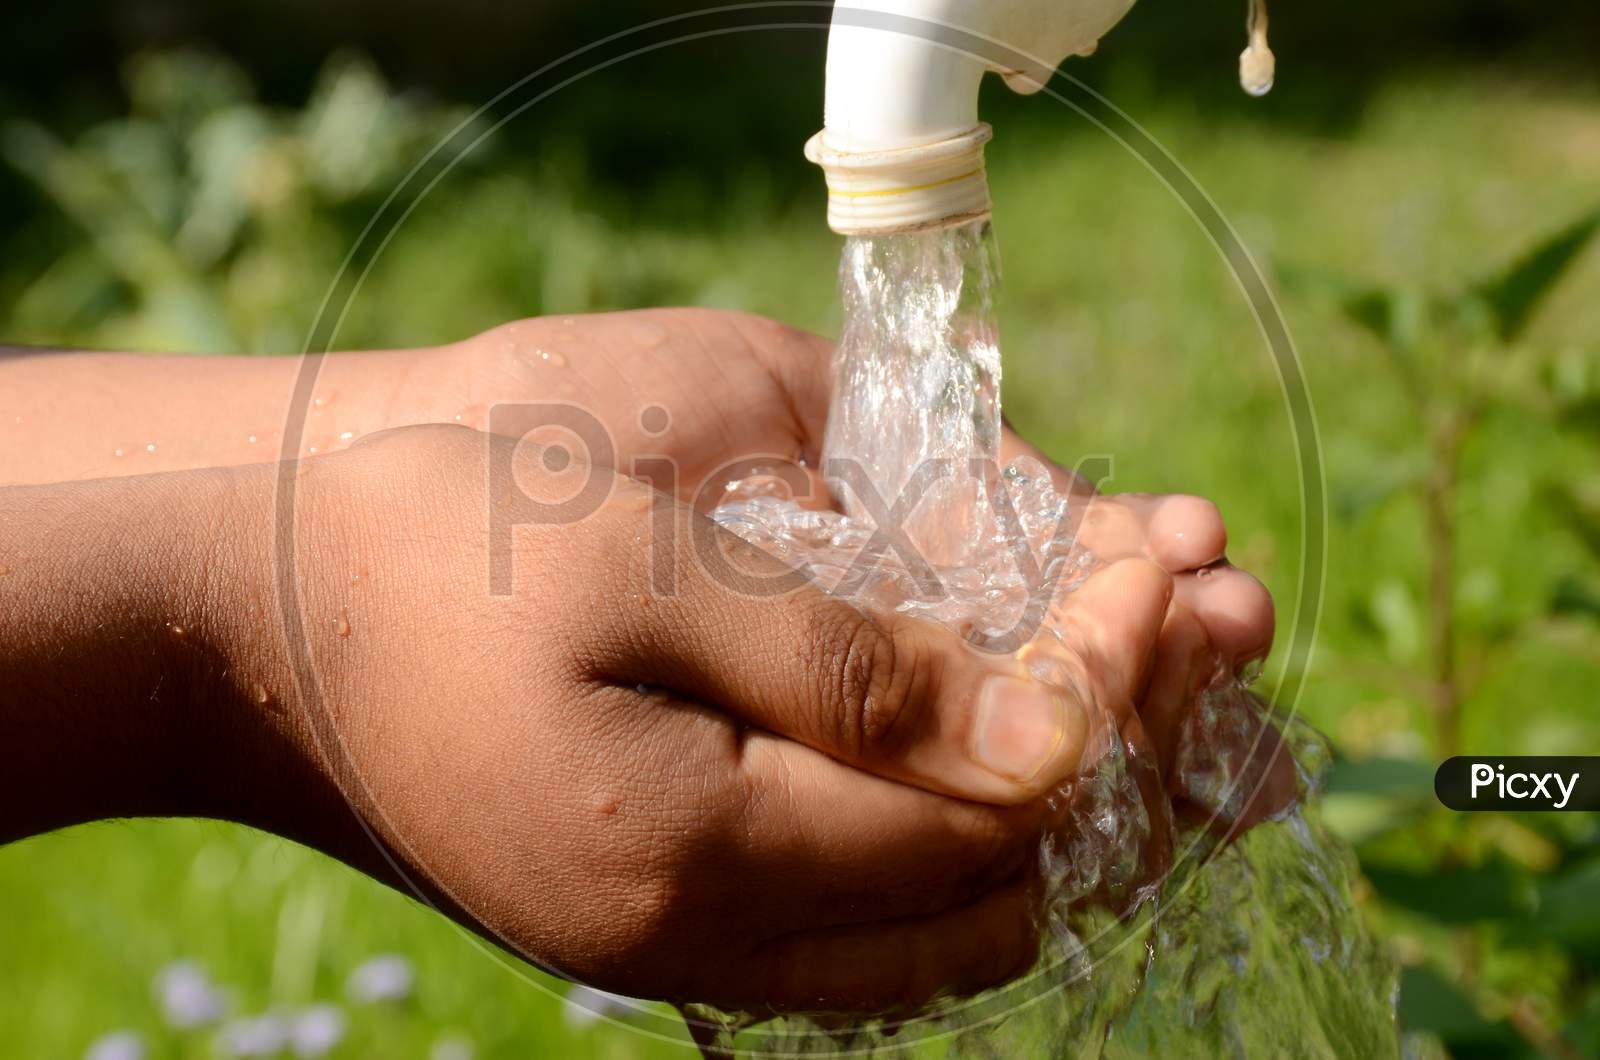 The White Tap Water With Hand Concept World Water Day Over Out Focus Green Background.